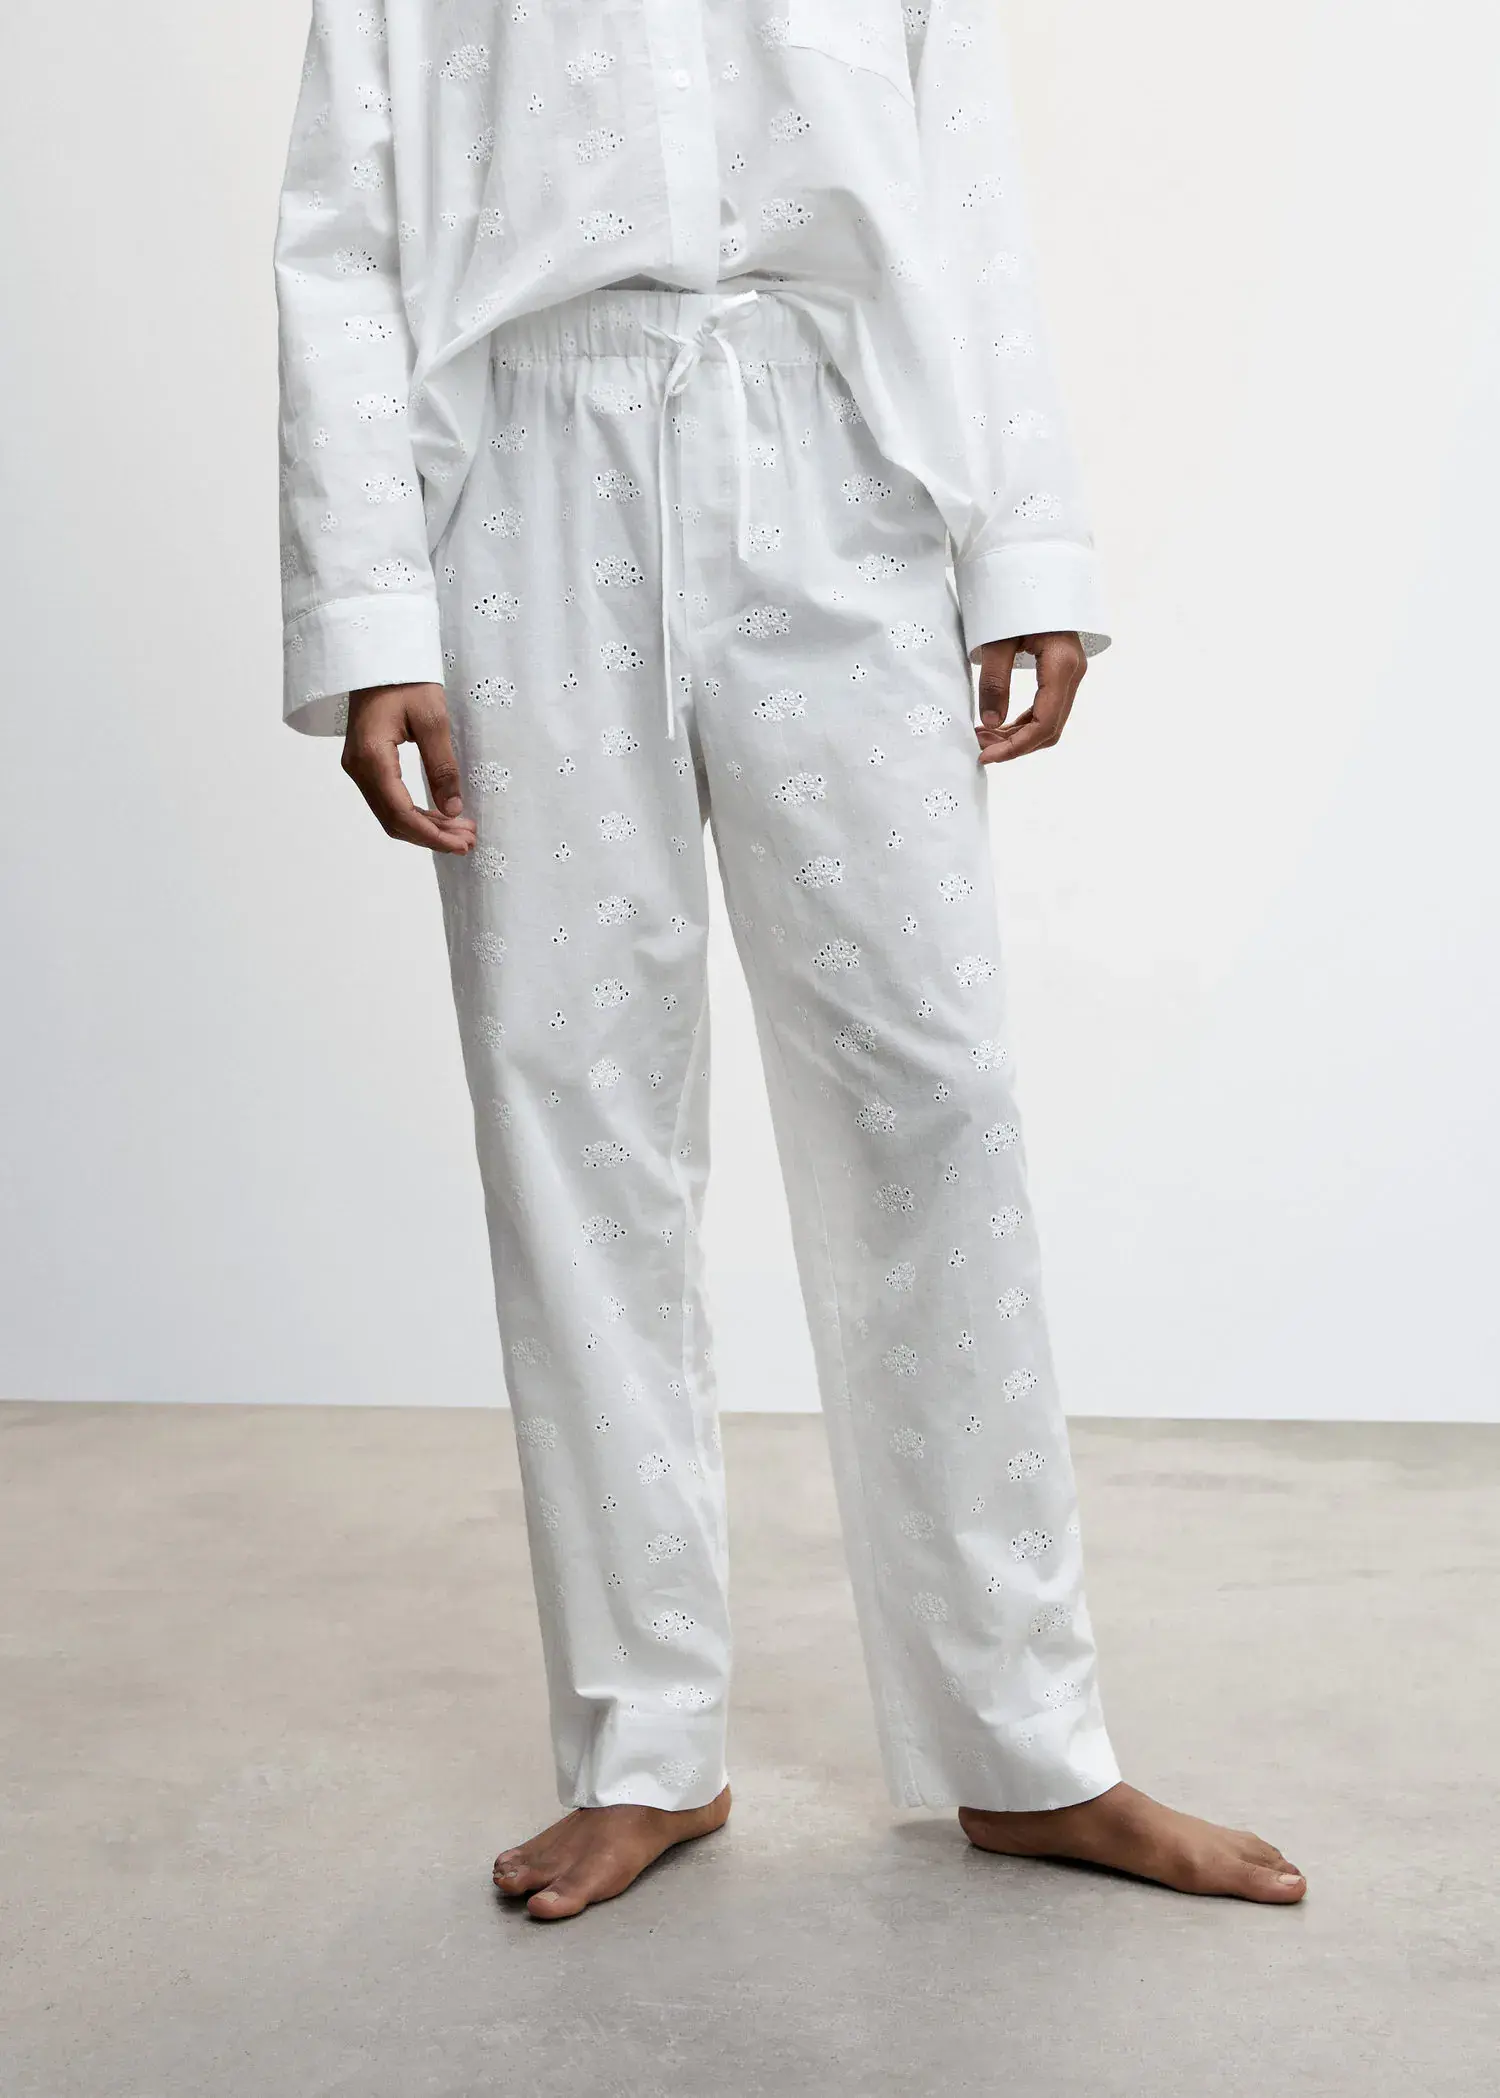 Mango Pajama pants with openwork details. a person standing in a room wearing white pajamas. 